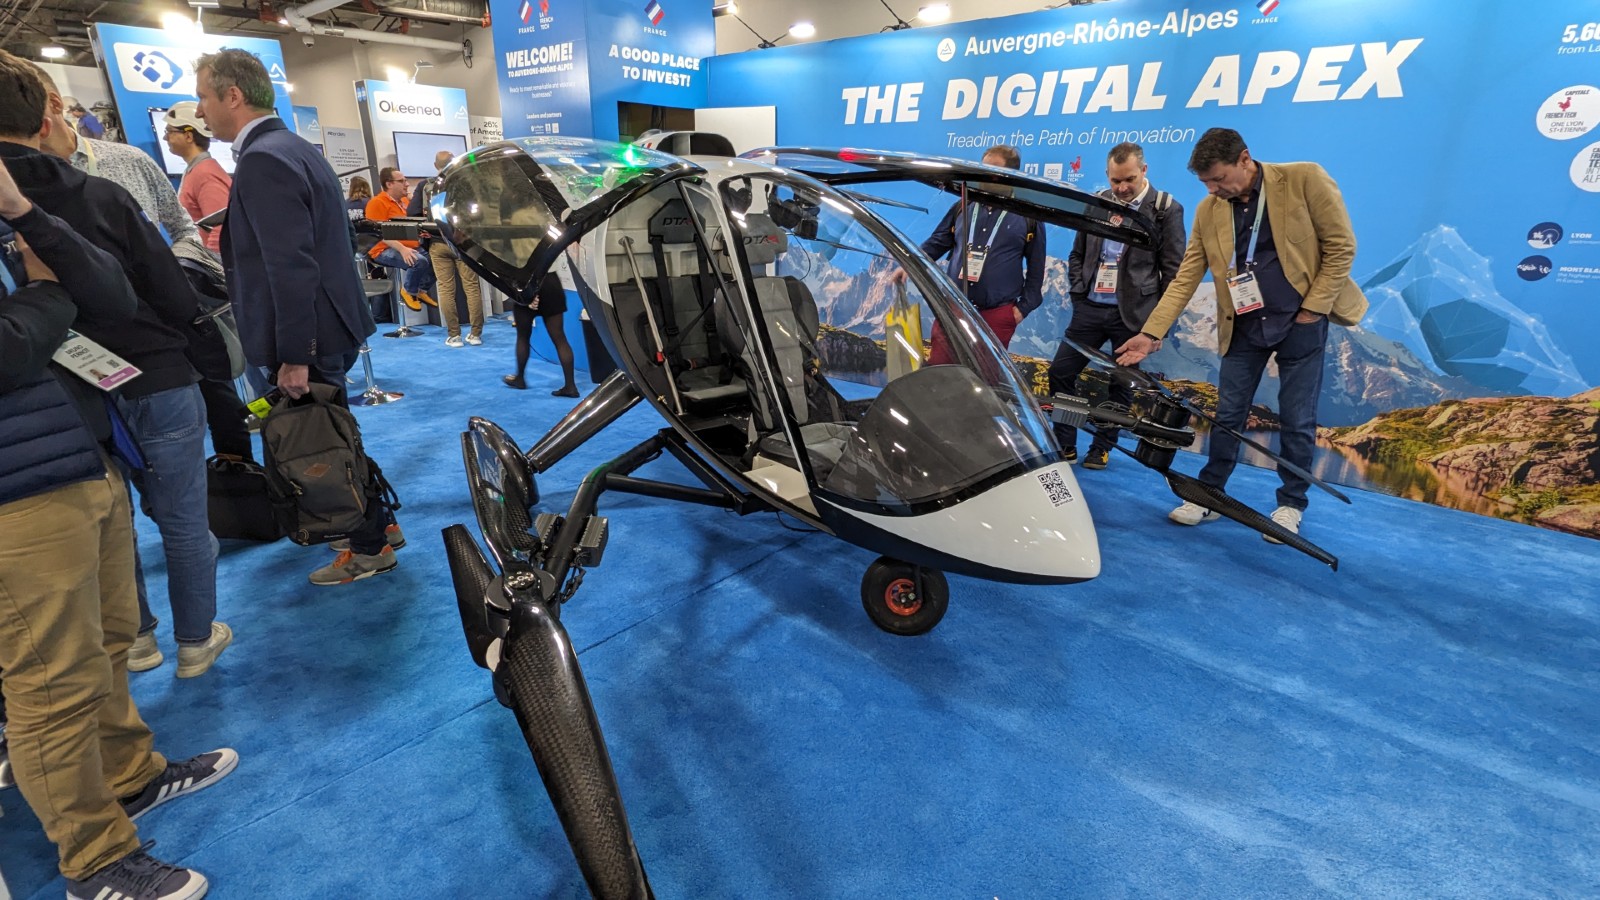 The digital apex is a drone that is on display at a trade show.